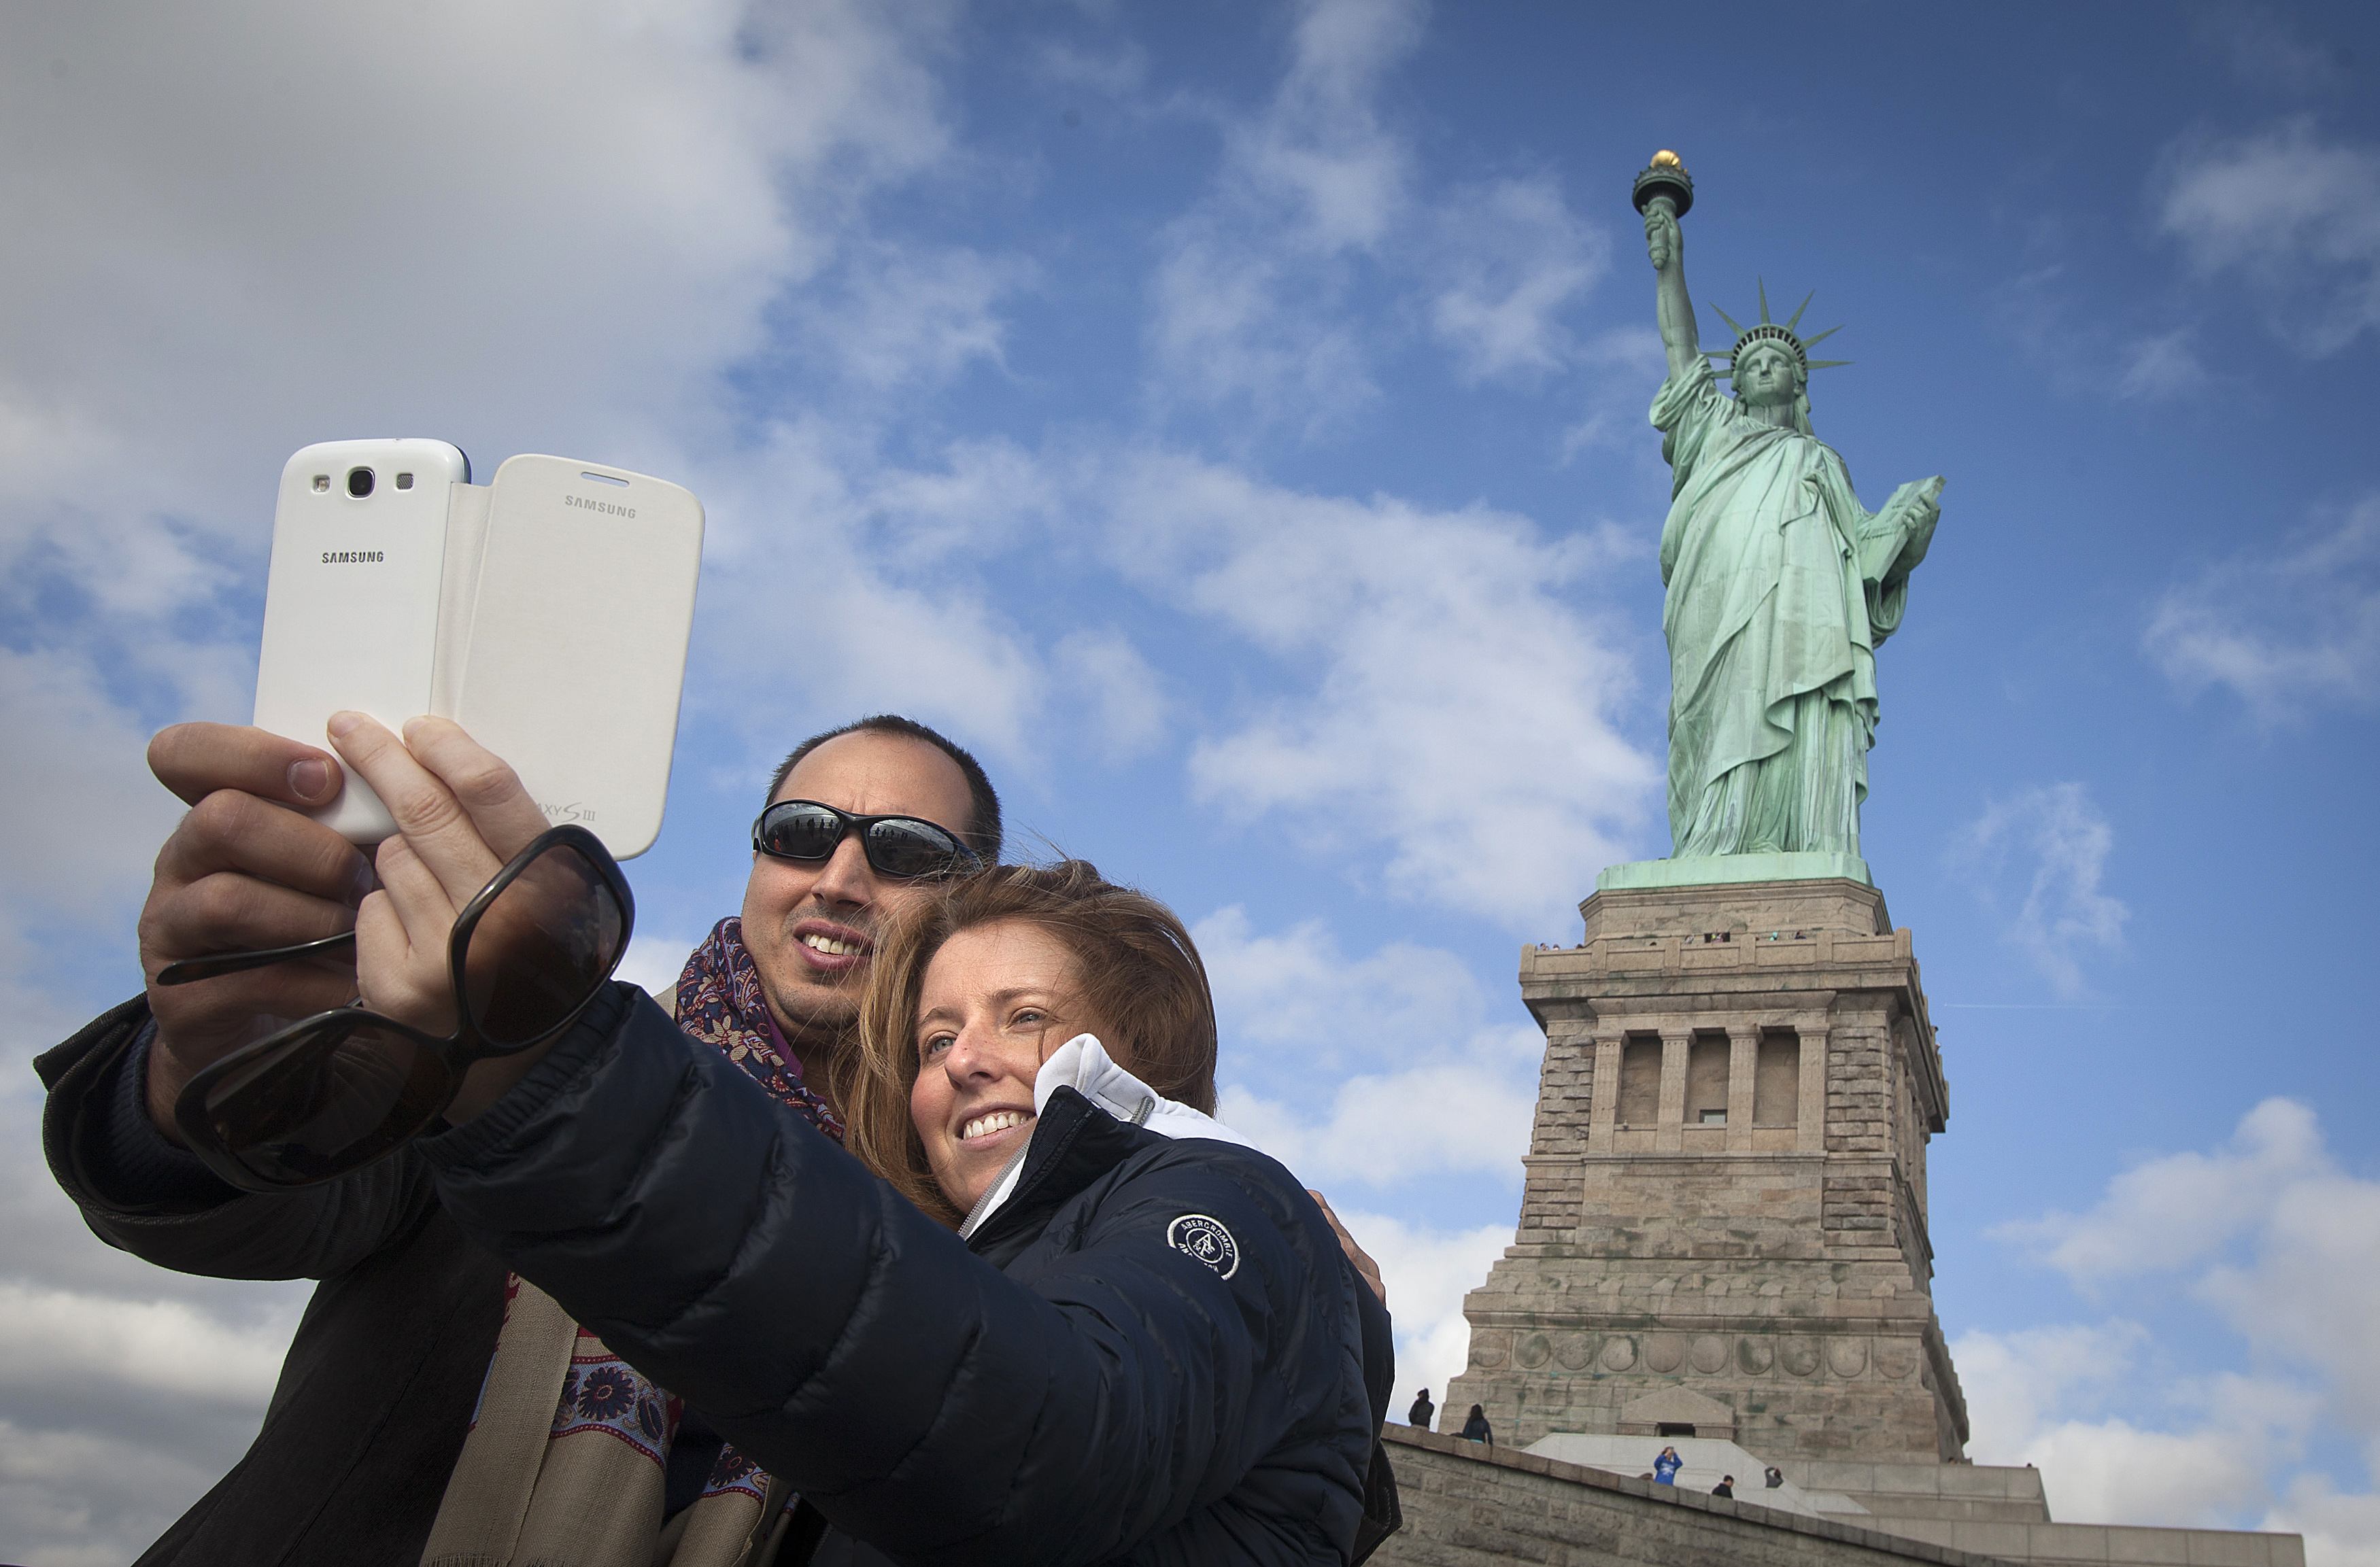 Tourists pose for a photo in front of the Statue of Liberty on Liberty Island in New York. Photo: Reuters